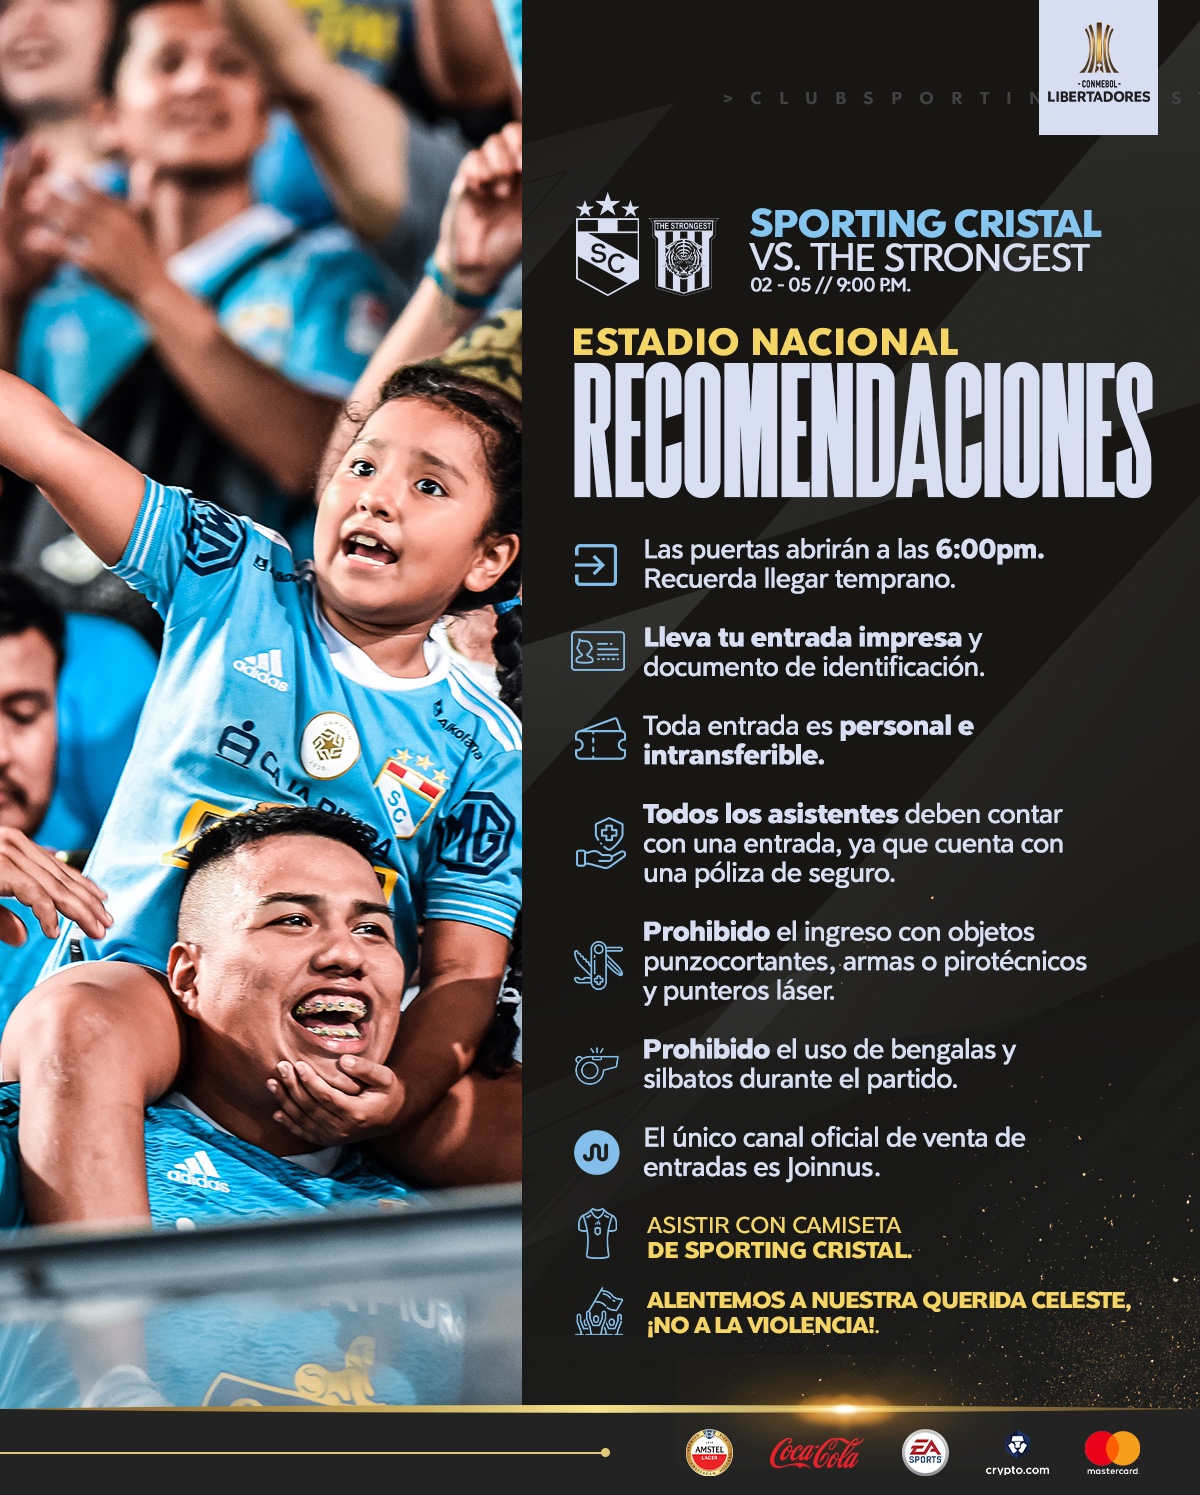 Recommendations for the Sporting Cristal match against The Strongest.